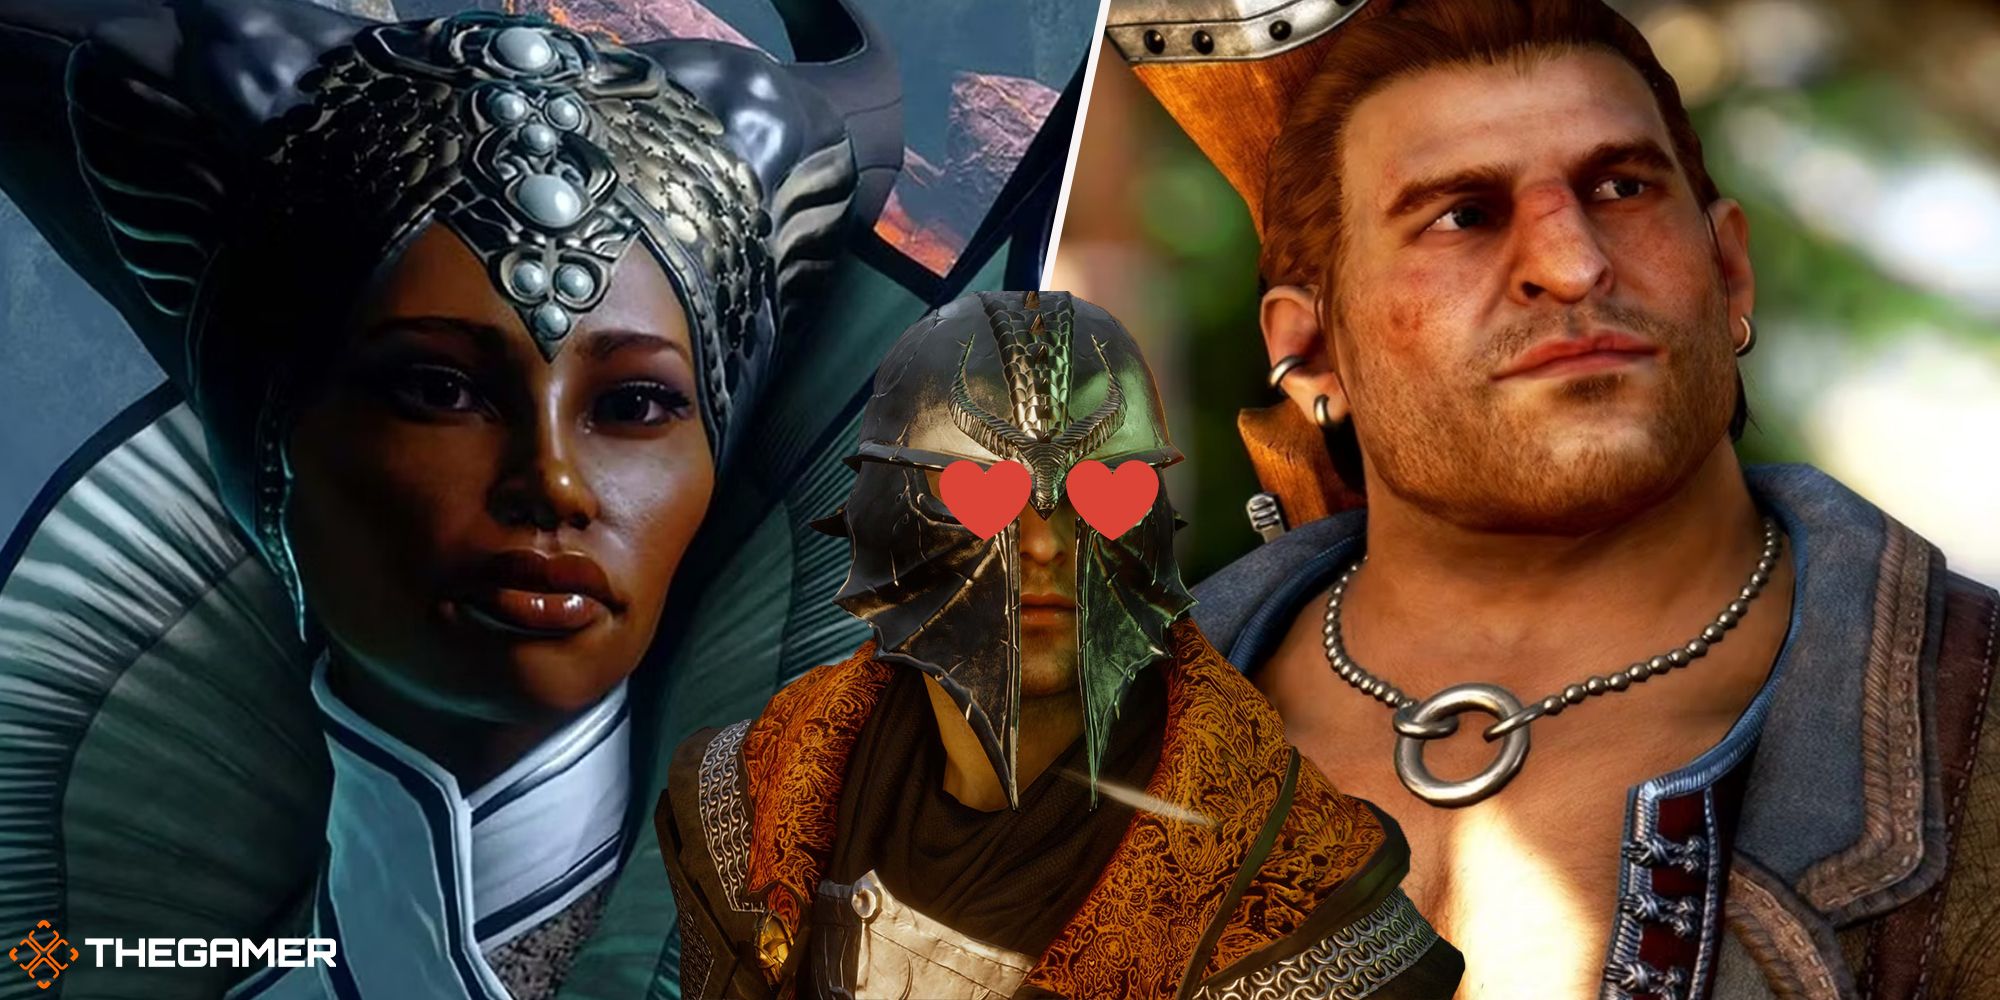 Dragon Age Inquisition - Vivienne, Varric, and the Inquisitor